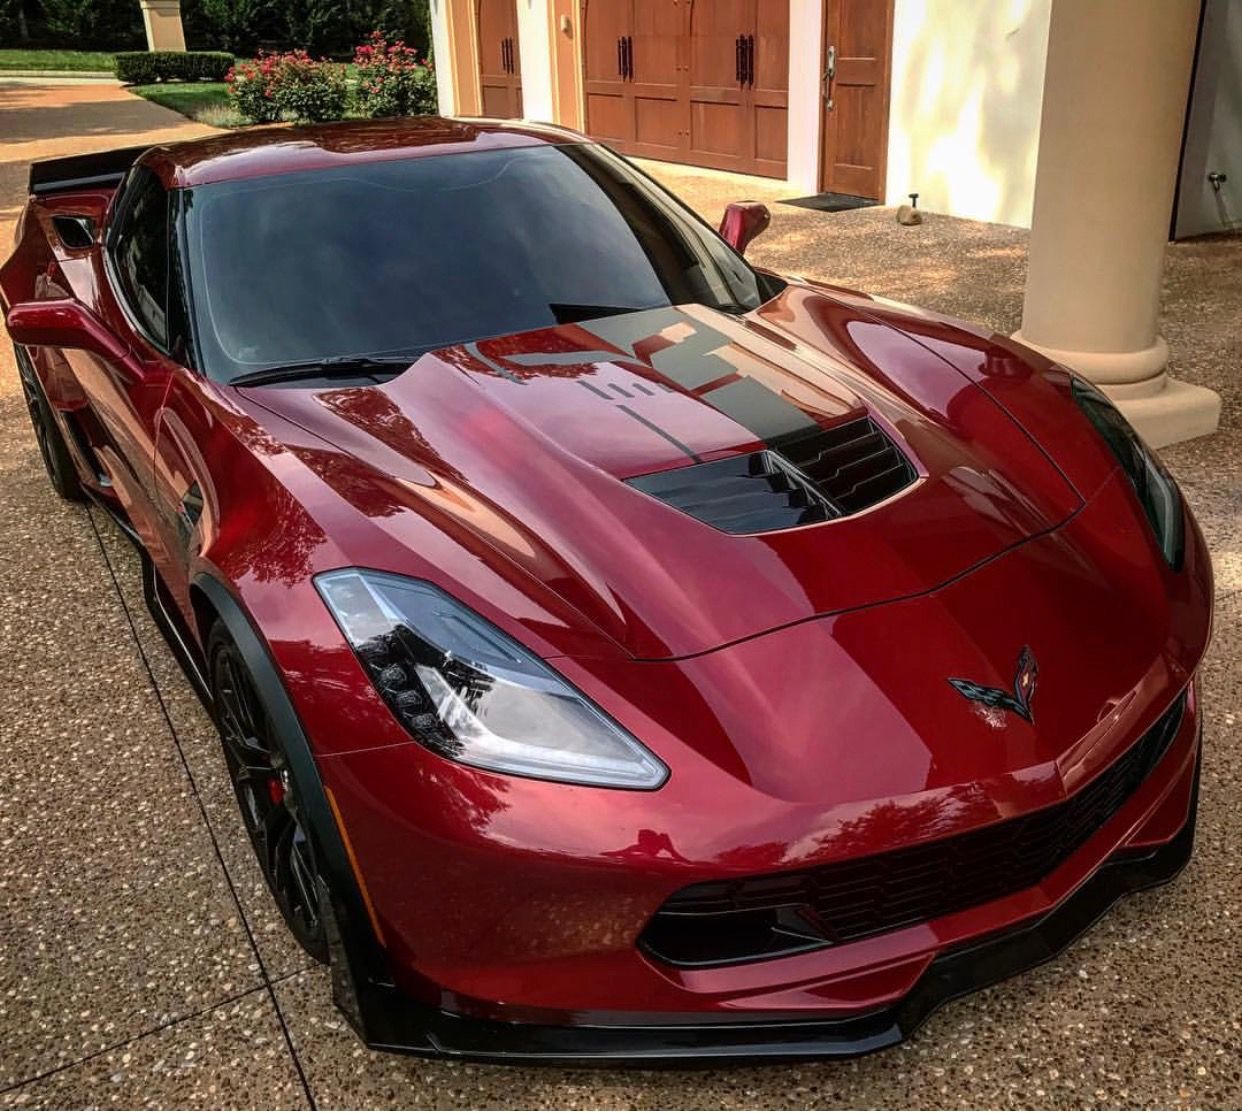 We found some examples of 2018 Corvette in the Long Beach Red color scheme....